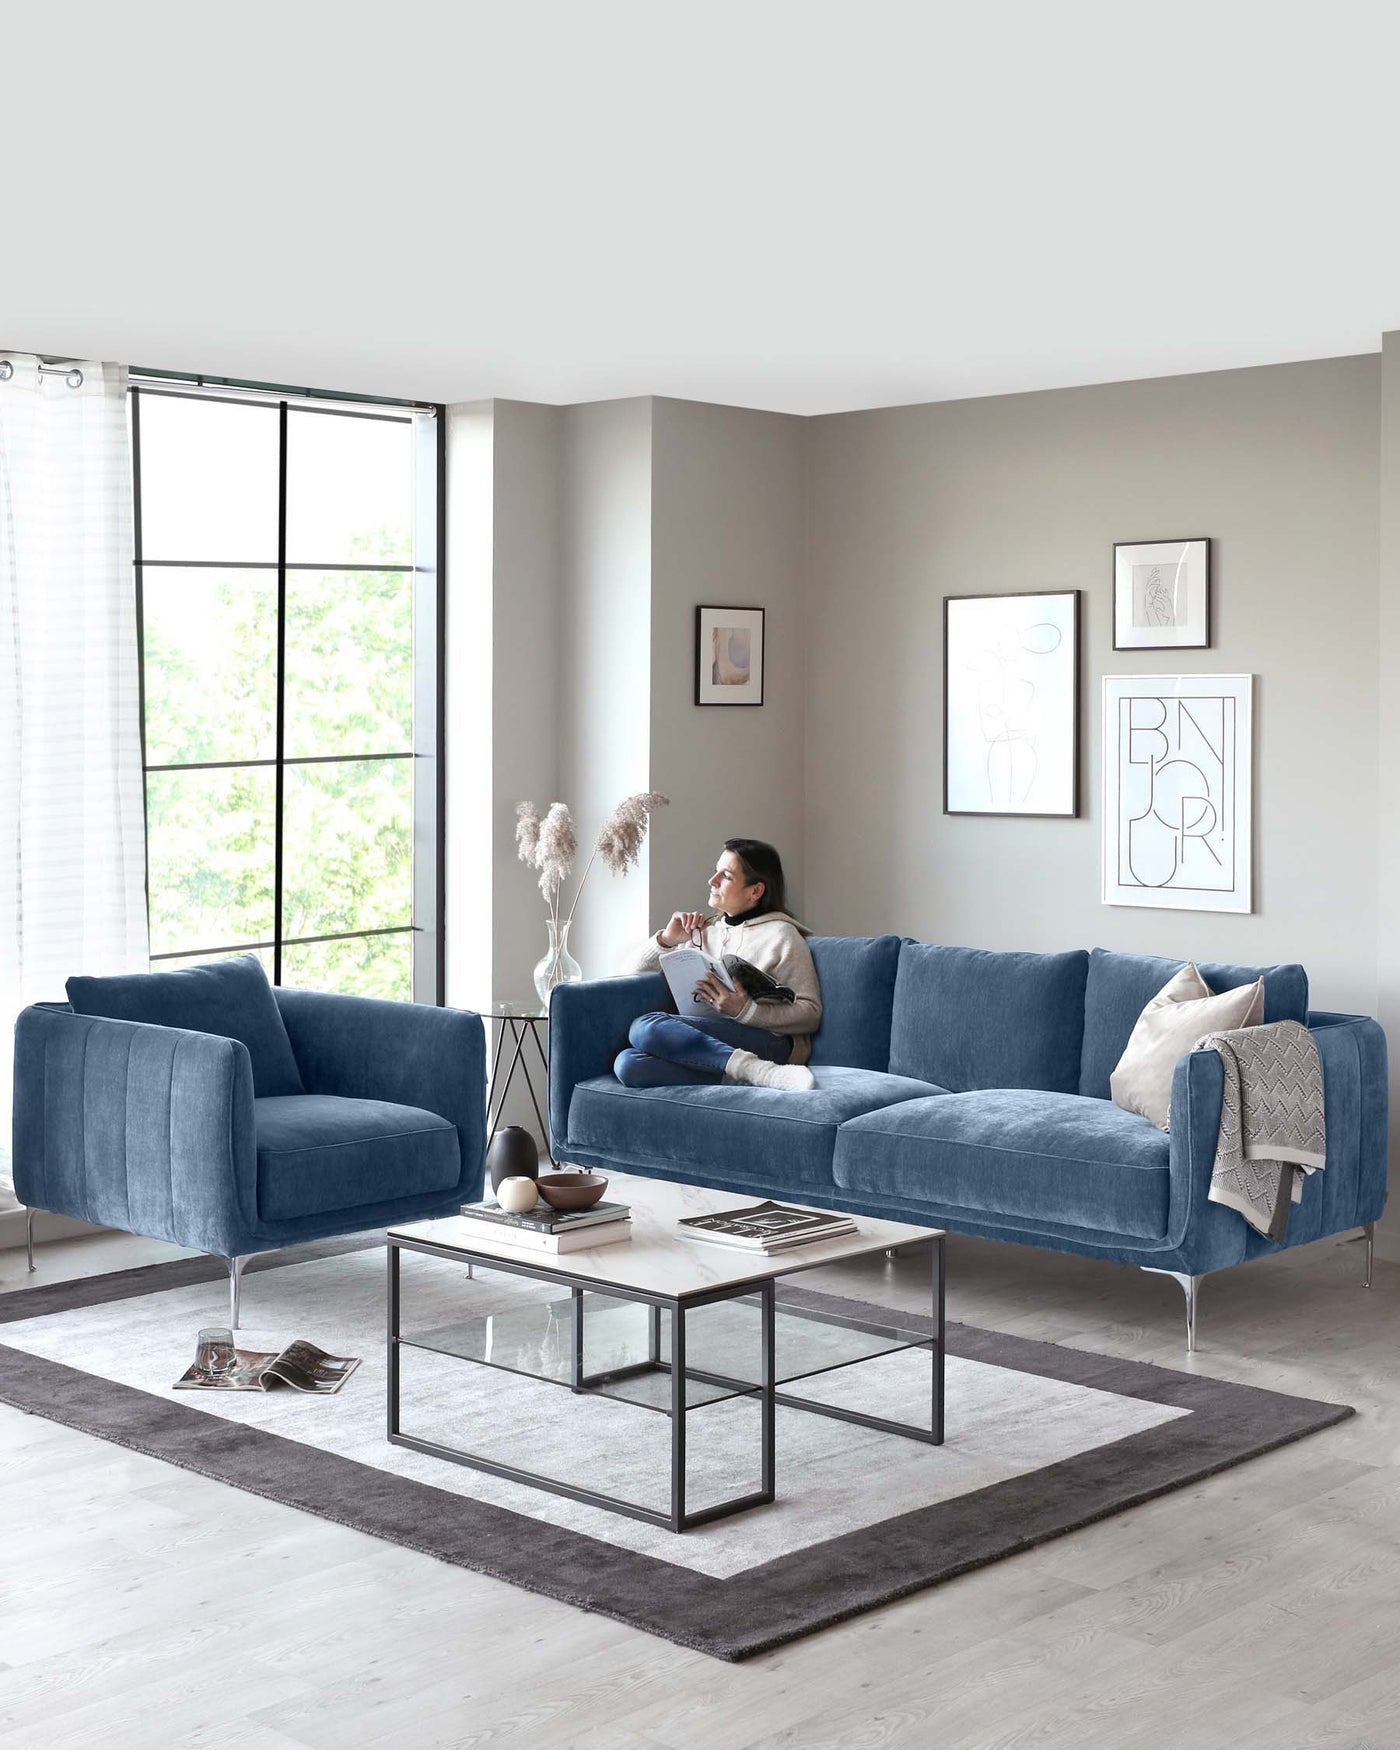 Modern living room furniture in plush blue fabric consisting of a three-seater sofa with clean lines, cylindrical cushions, and metal legs, accompanied by a matching single-seater armchair. A square metal-framed coffee table with a glass top sits on a grey area rug, and a side table with a round glass top and a black tripod base is present.